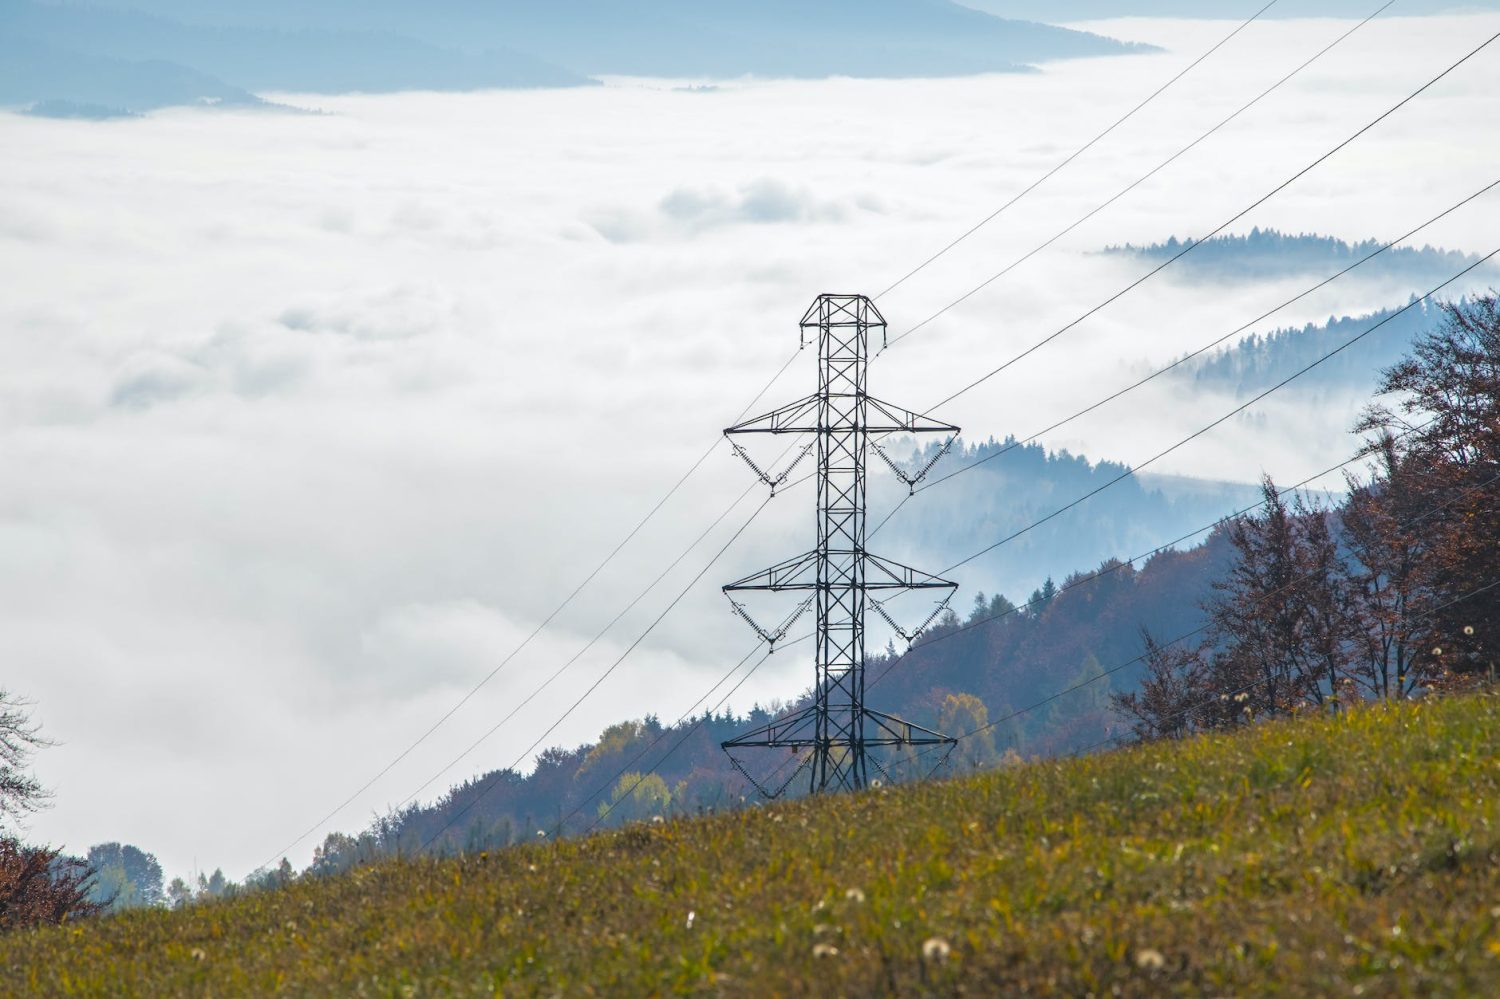 In a first, the US will require grid planning for 20 years into the future - Electrek